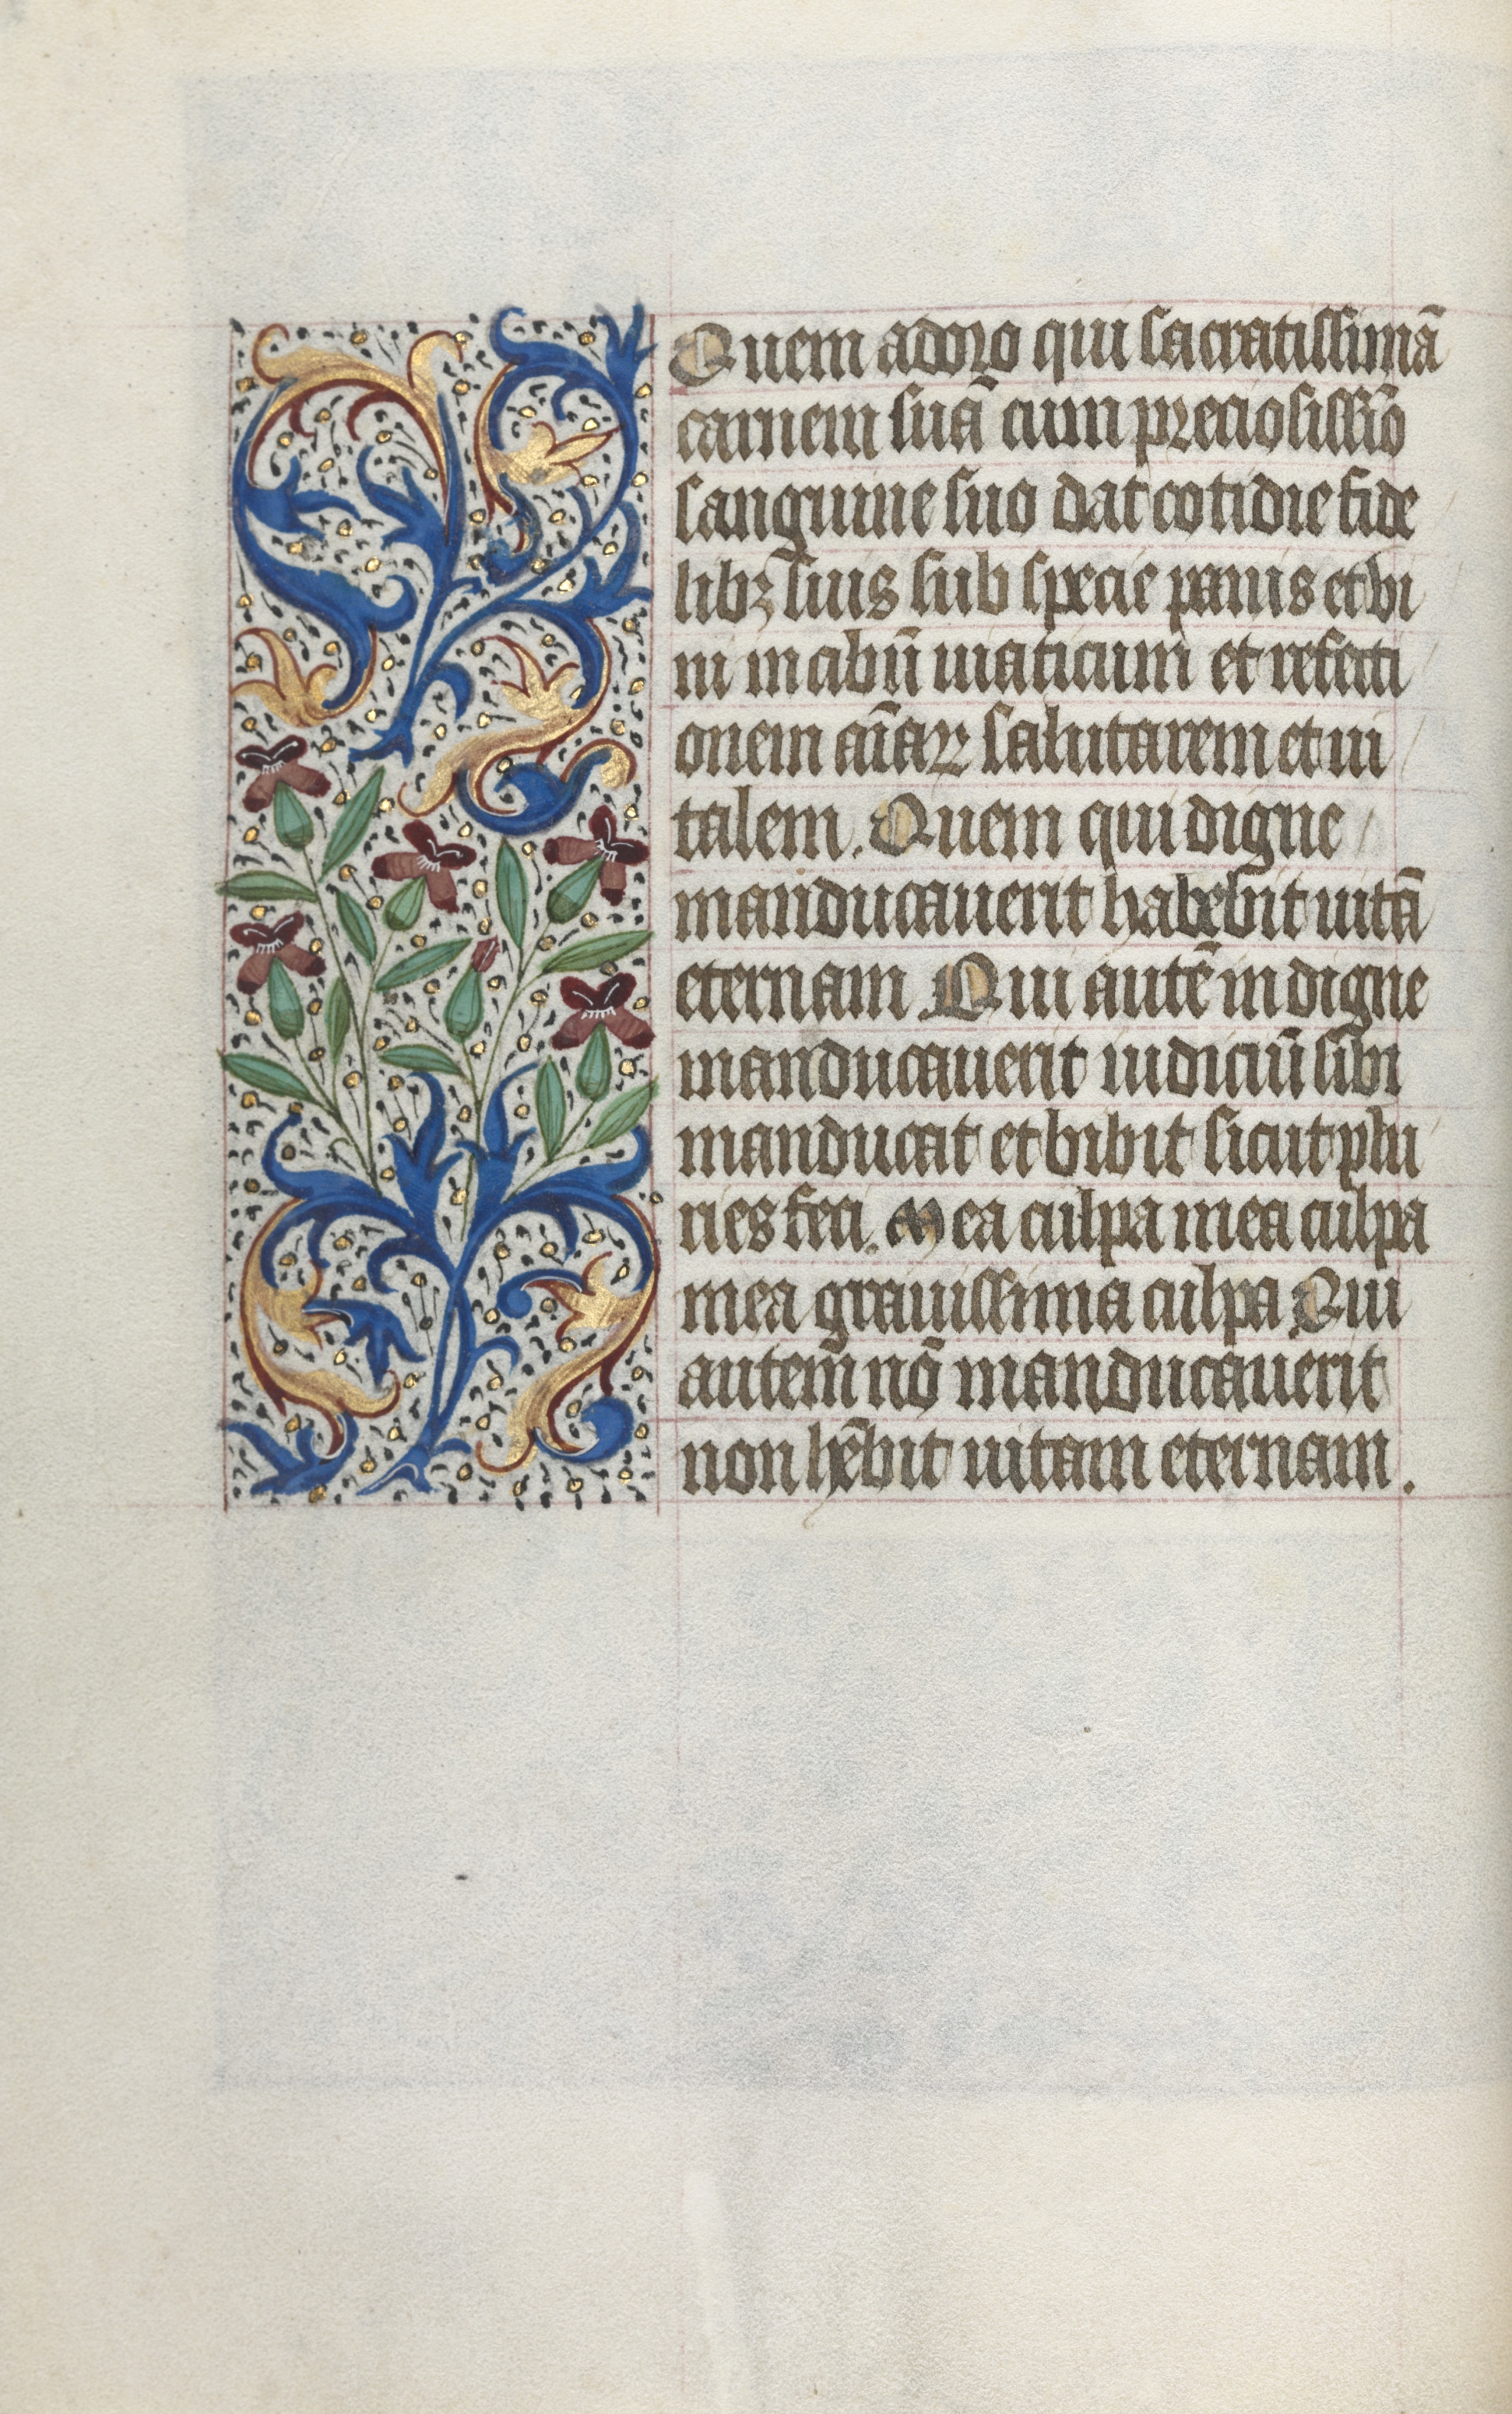 Book of Hours (Use of Rouen): fol. 23v